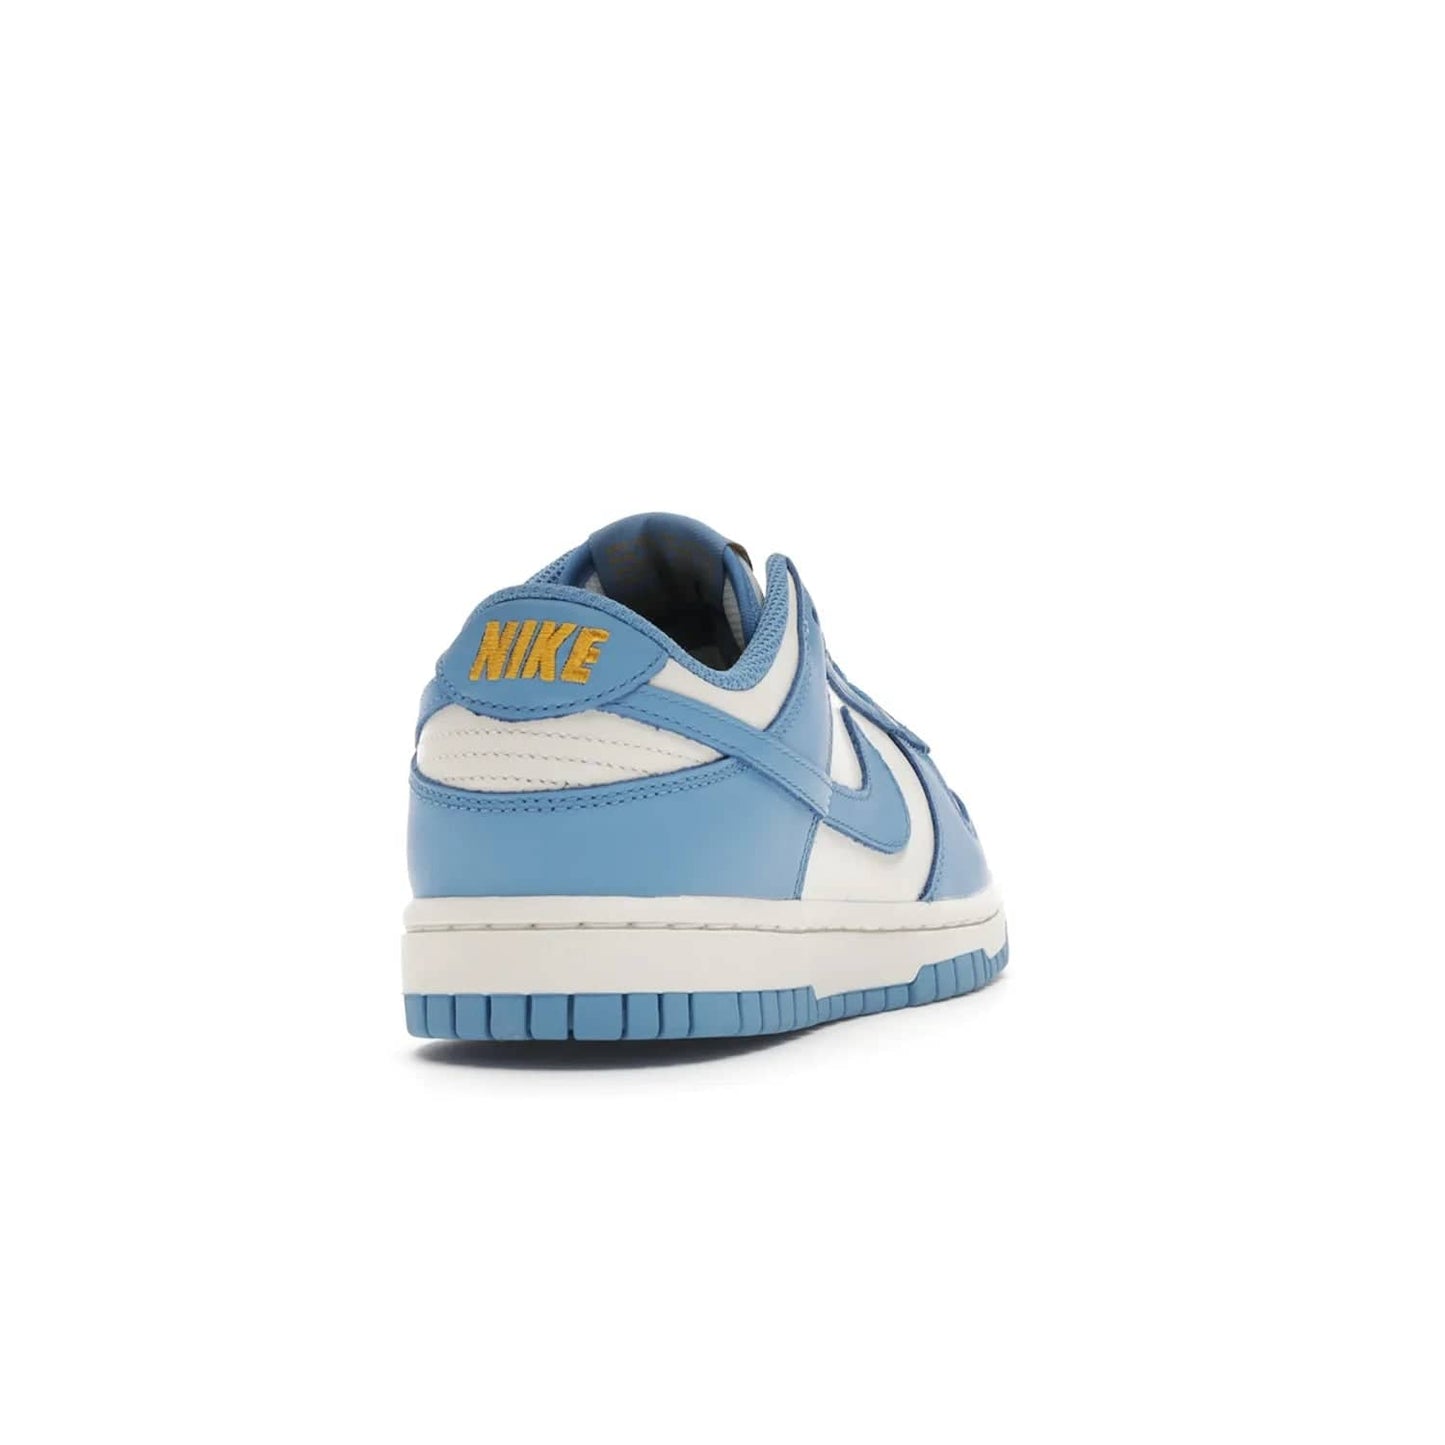 Nike Dunk Low Coast (Women's) - Image 30 - Only at www.BallersClubKickz.com - Iconic UCLA colors honor the west coast with the Nike Dunk Low Coast (Women's), a bold combo of light blue, white and yellow. Light leather upper with white midsole and light EVA outsole offer a modern twist. Released Feb 2021 for $100.